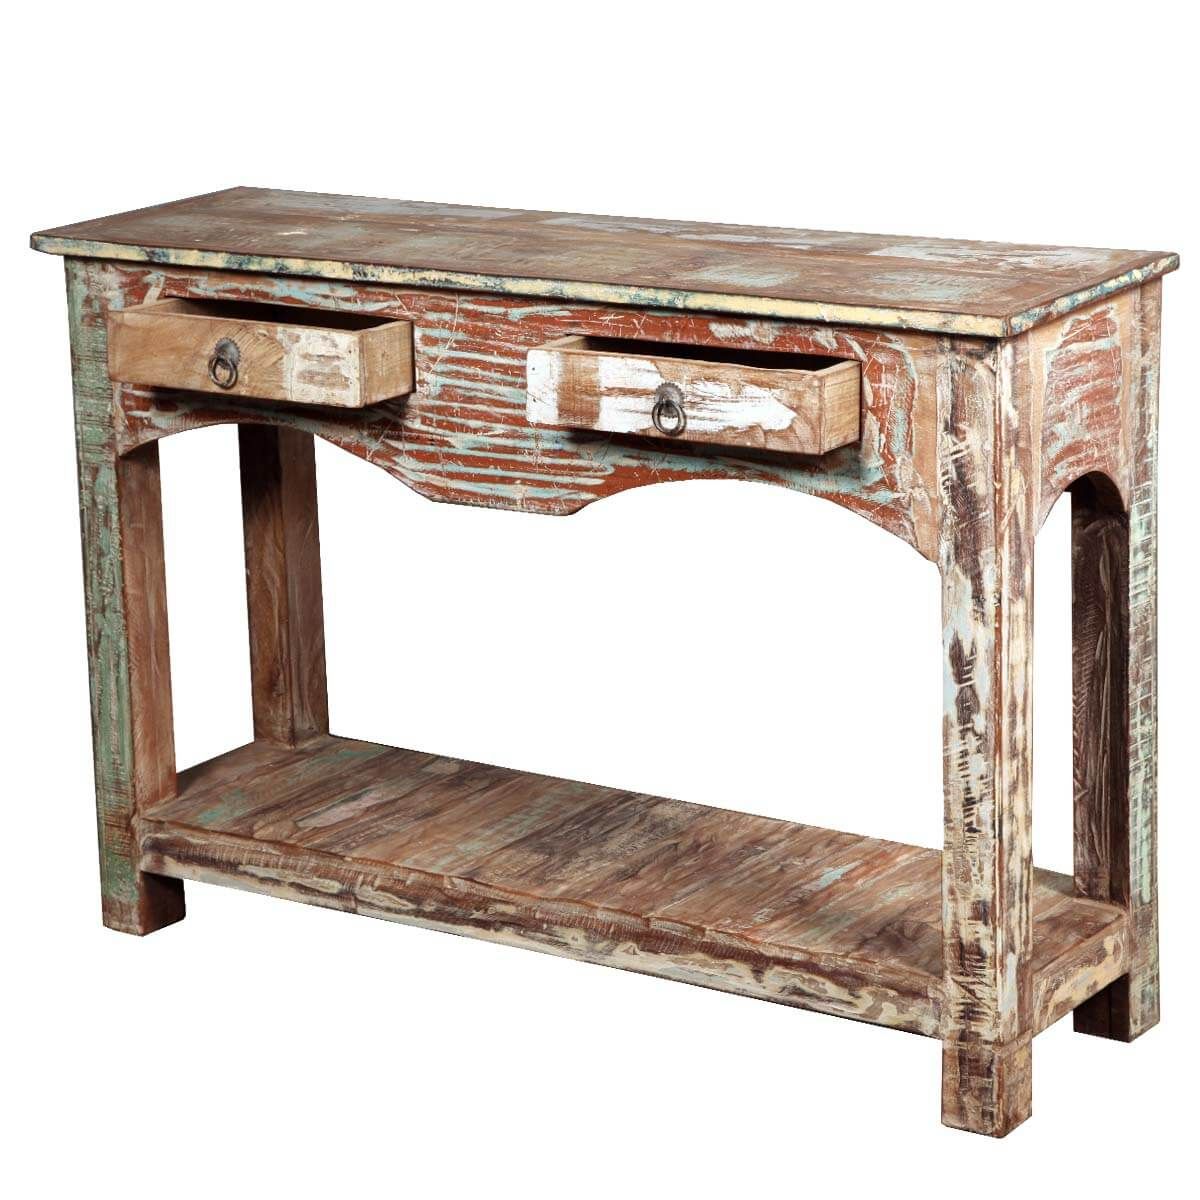 Distressed Reclaimed Wood 2 Drawer Console Hall Table Intended For Barnwood Console Tables (View 3 of 20)